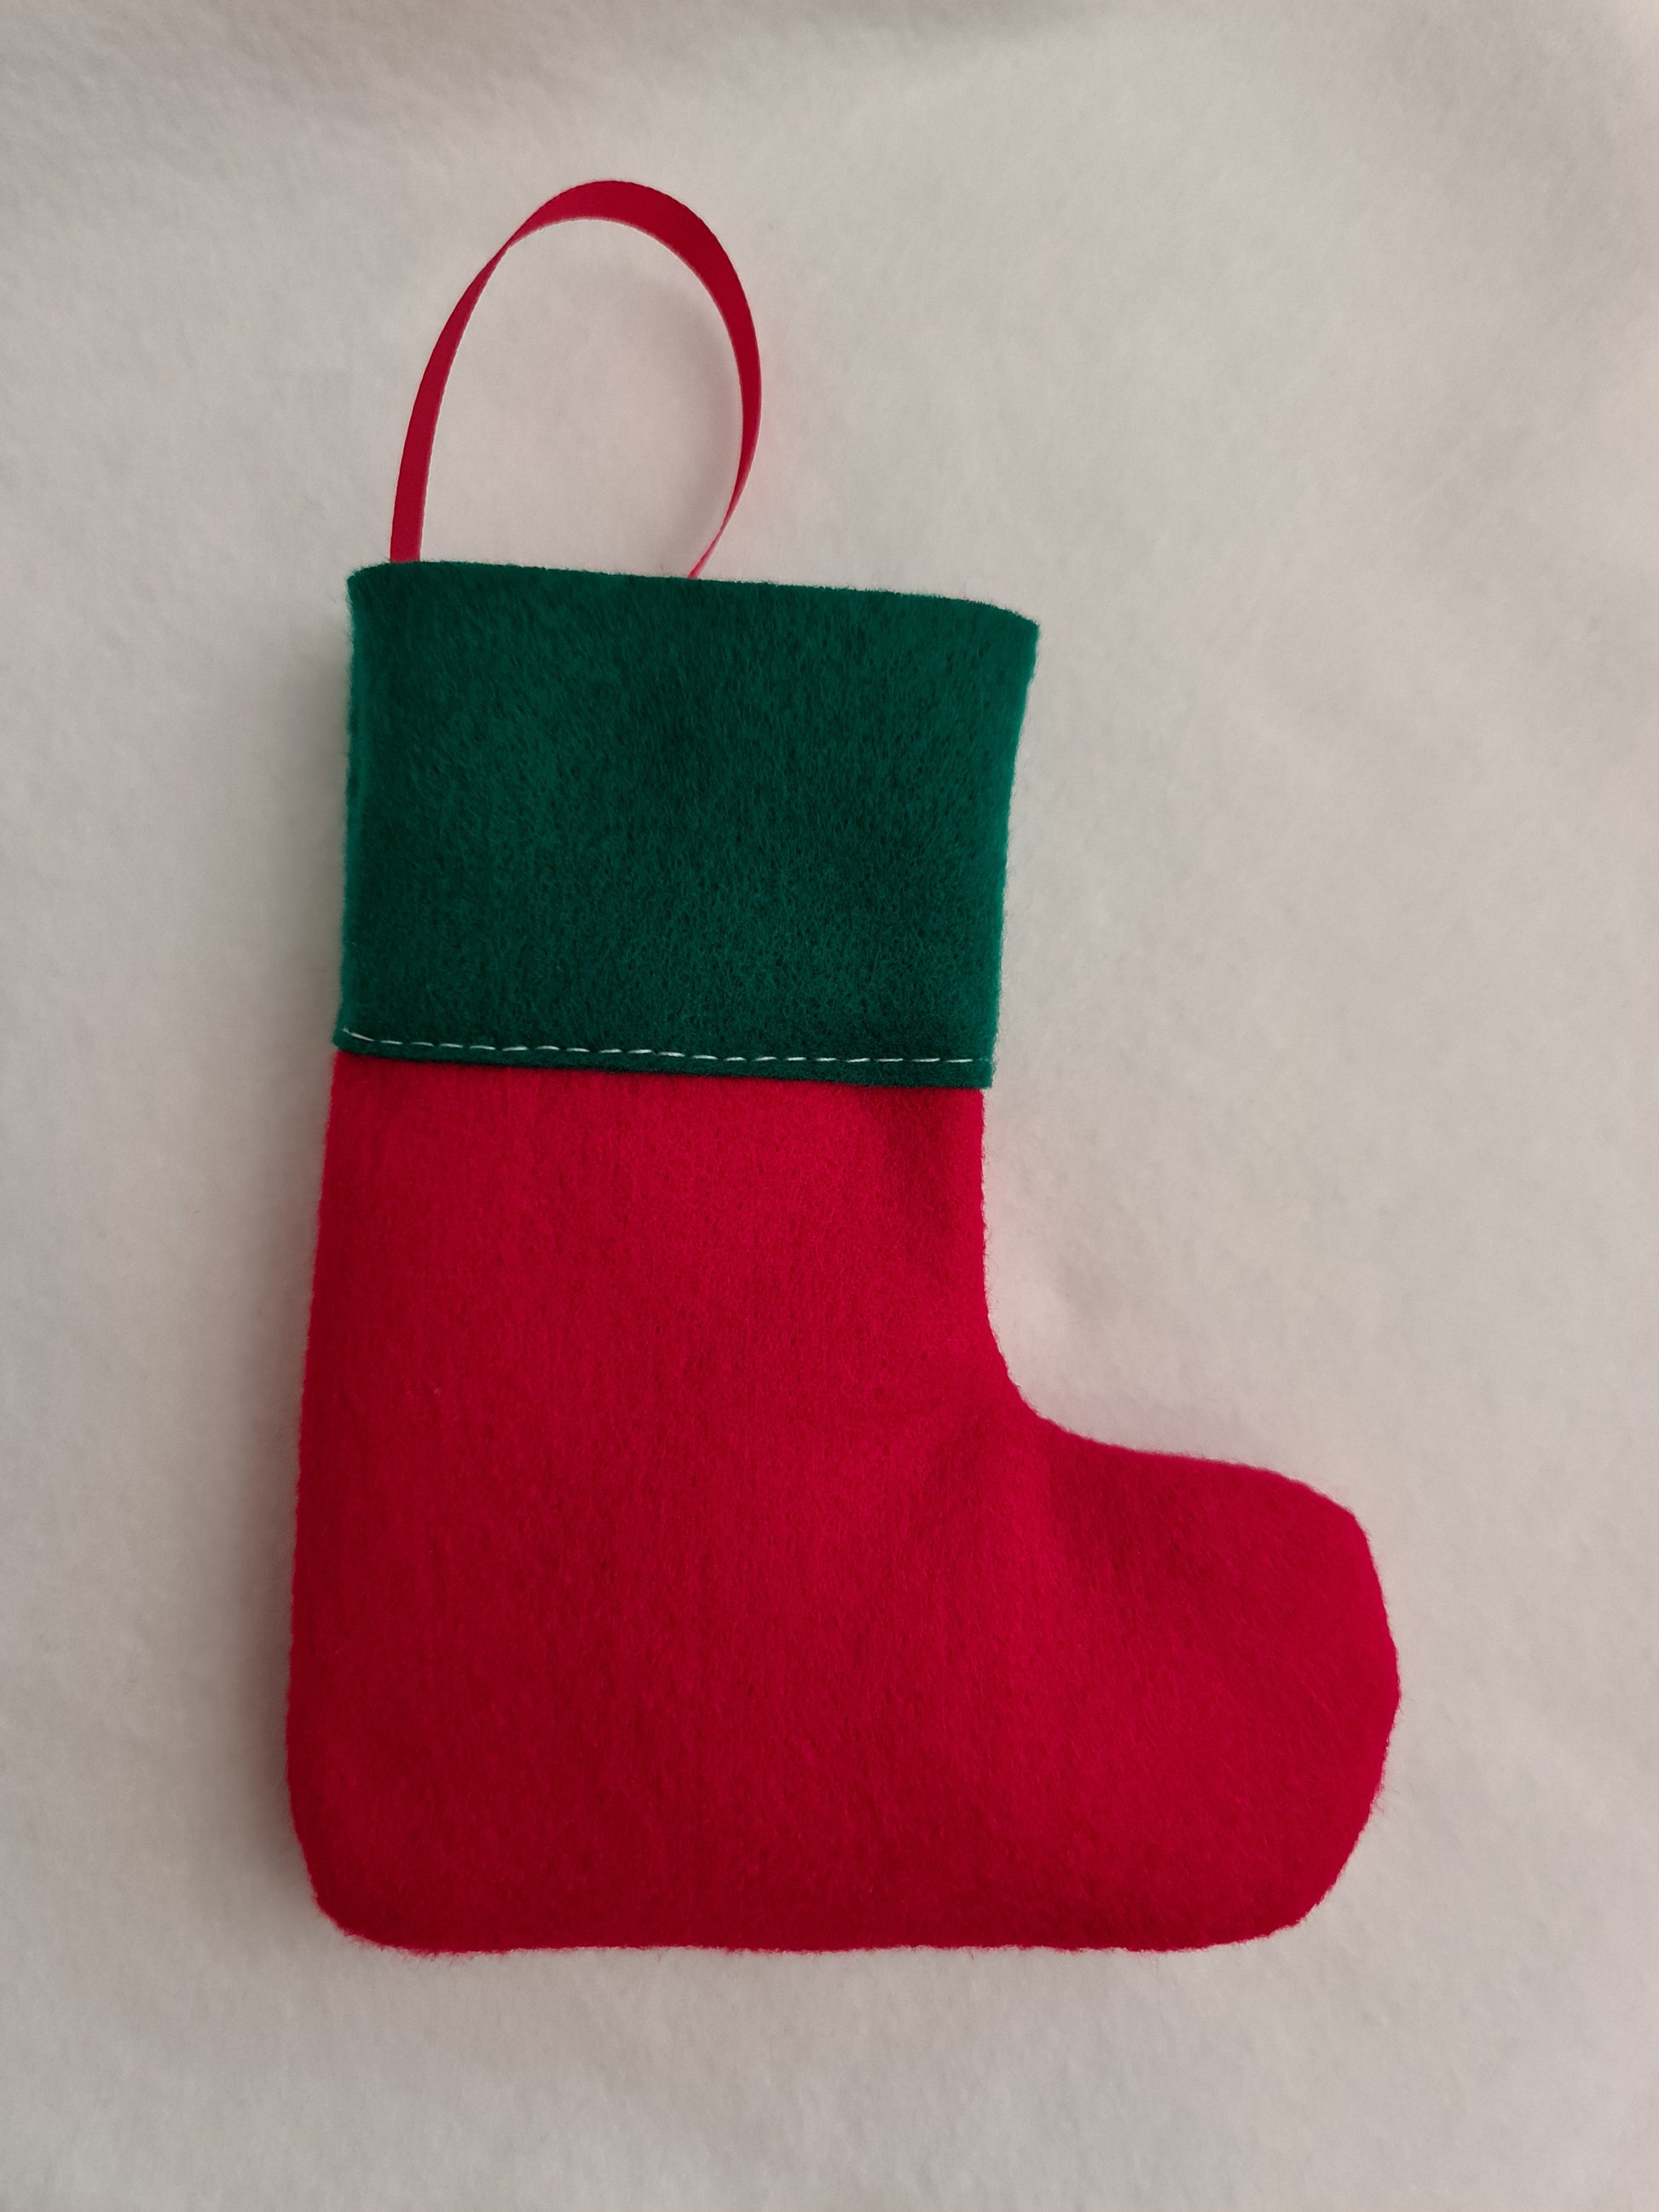 Miniature Christmas stocking - red and green